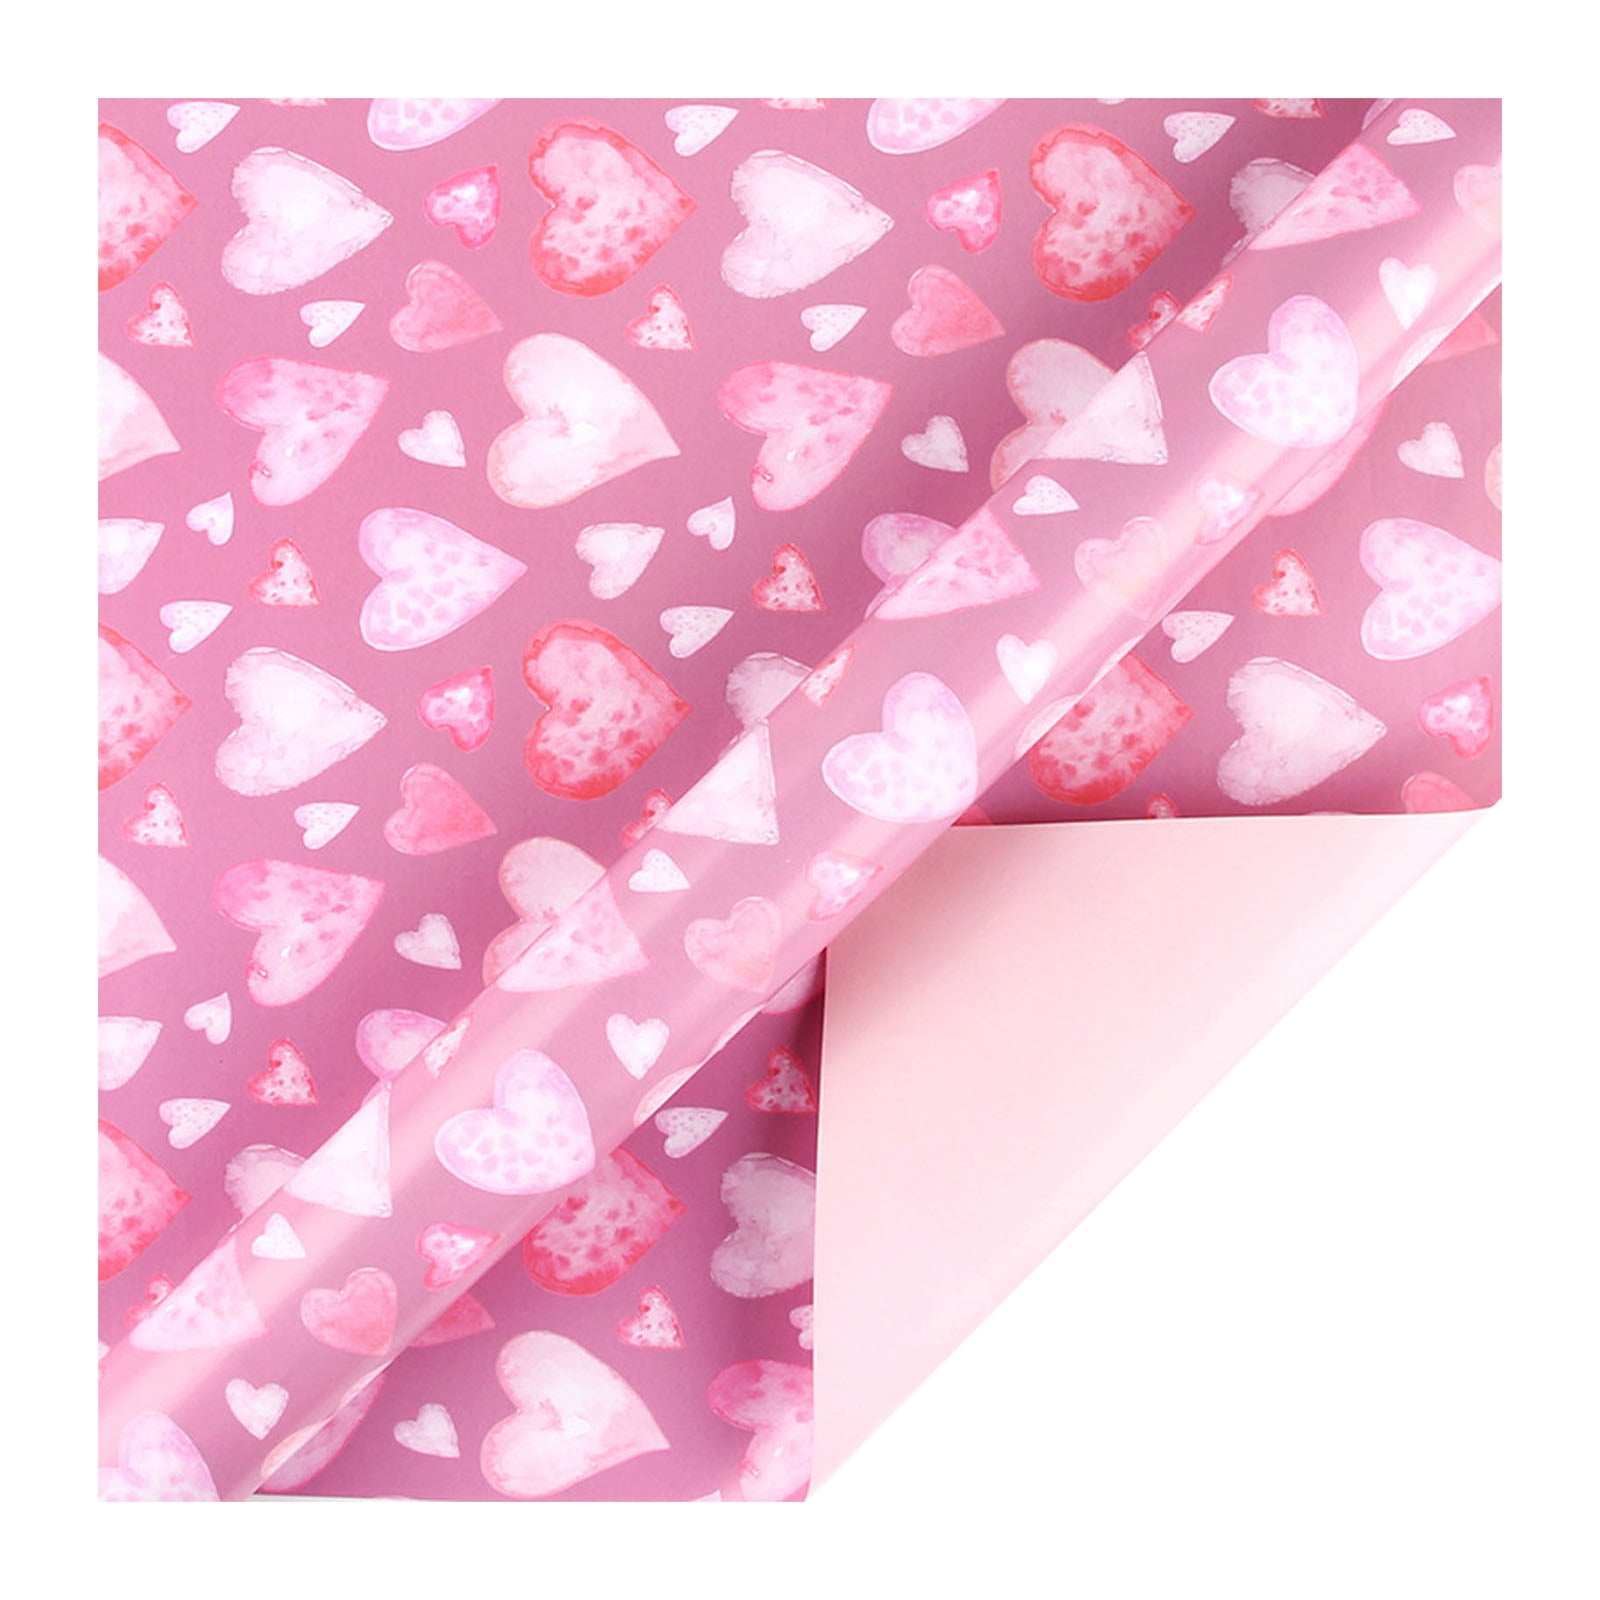 Boho Pink Hearts Wrapping Paper